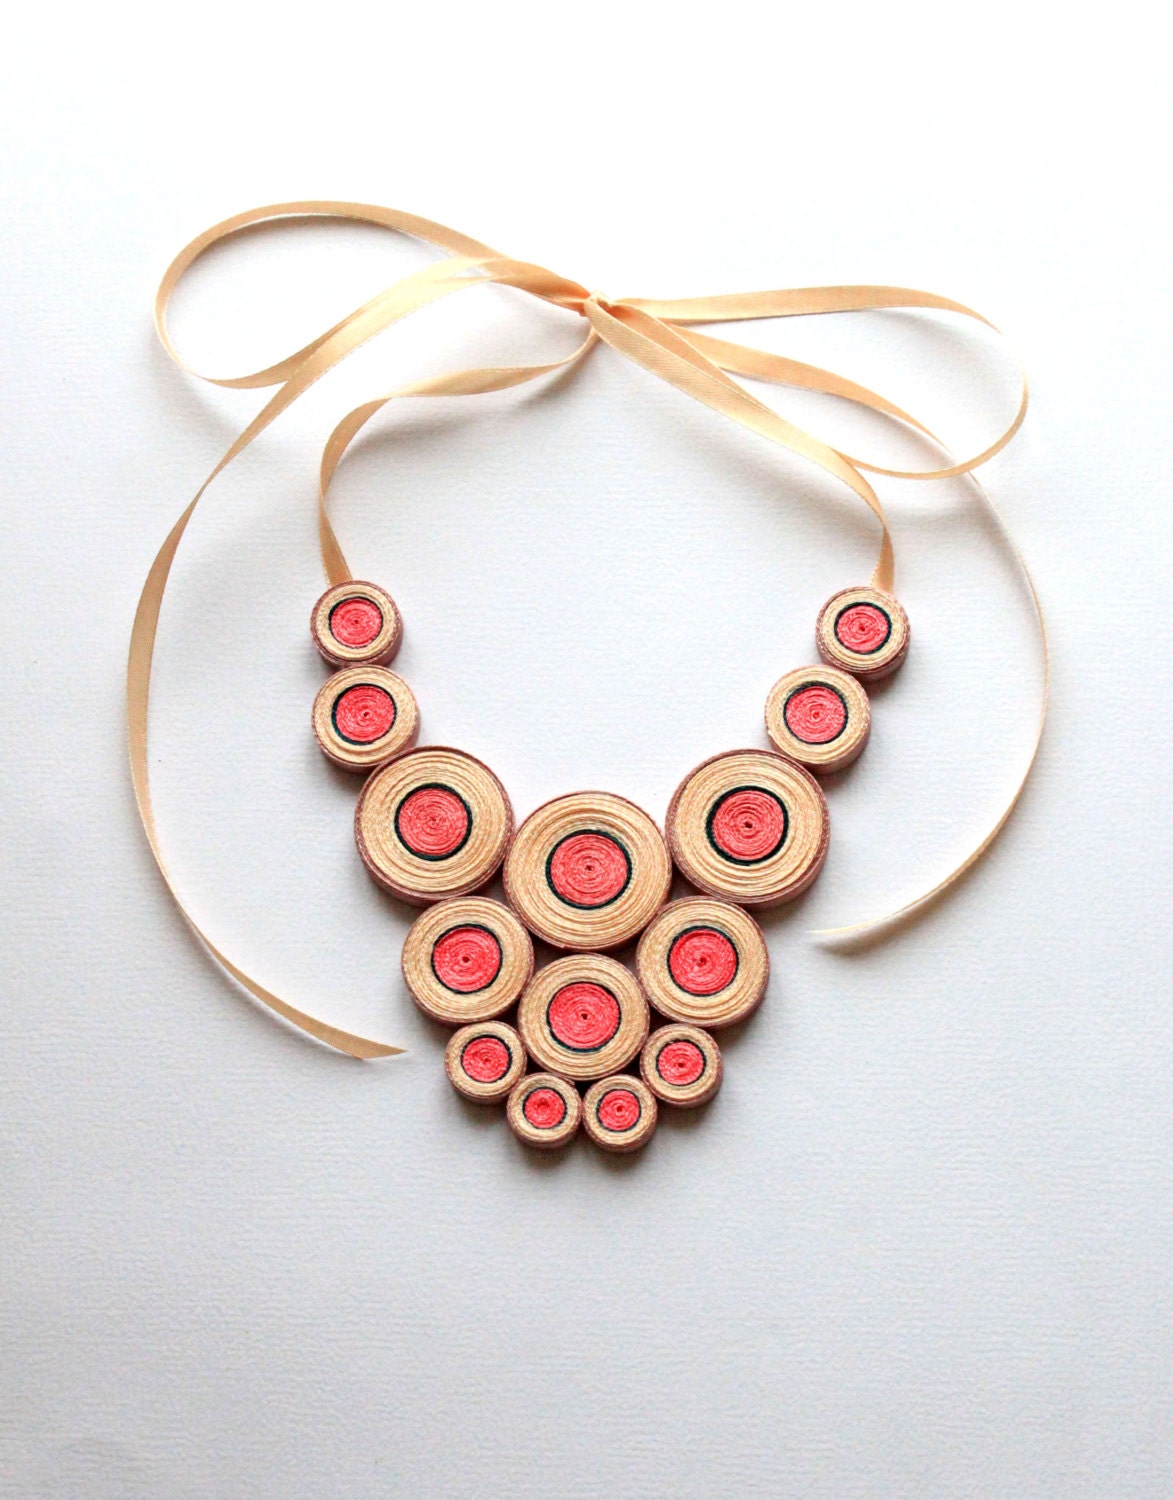 Statement necklace - bubble necklace - bib necklace - OOAk ready to ship